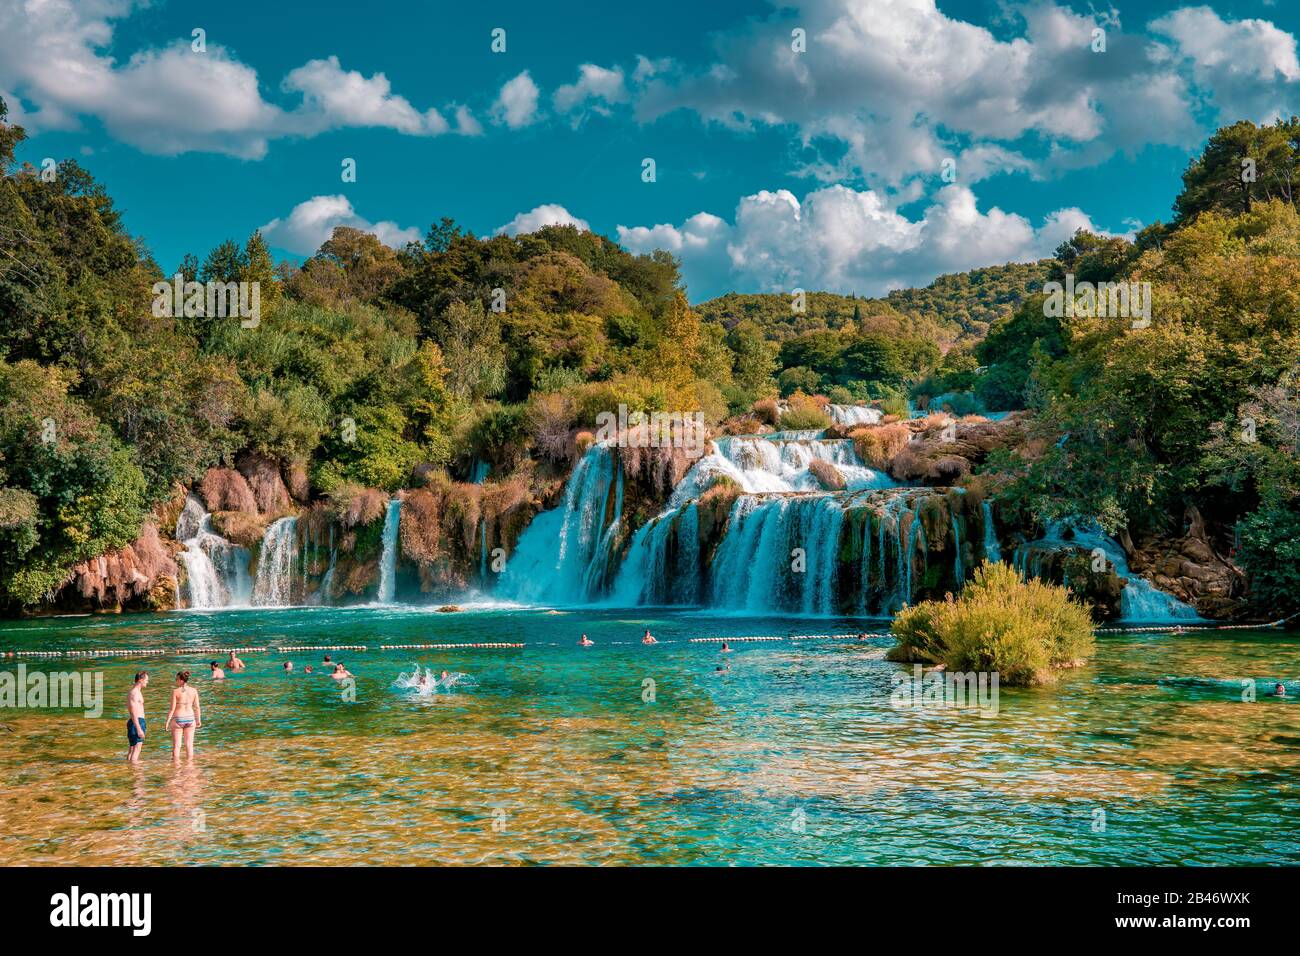 KRKA waterfalls Croatia September , krka national park Croatia on a bright summer evening with people relaxing in the water Stock Photo